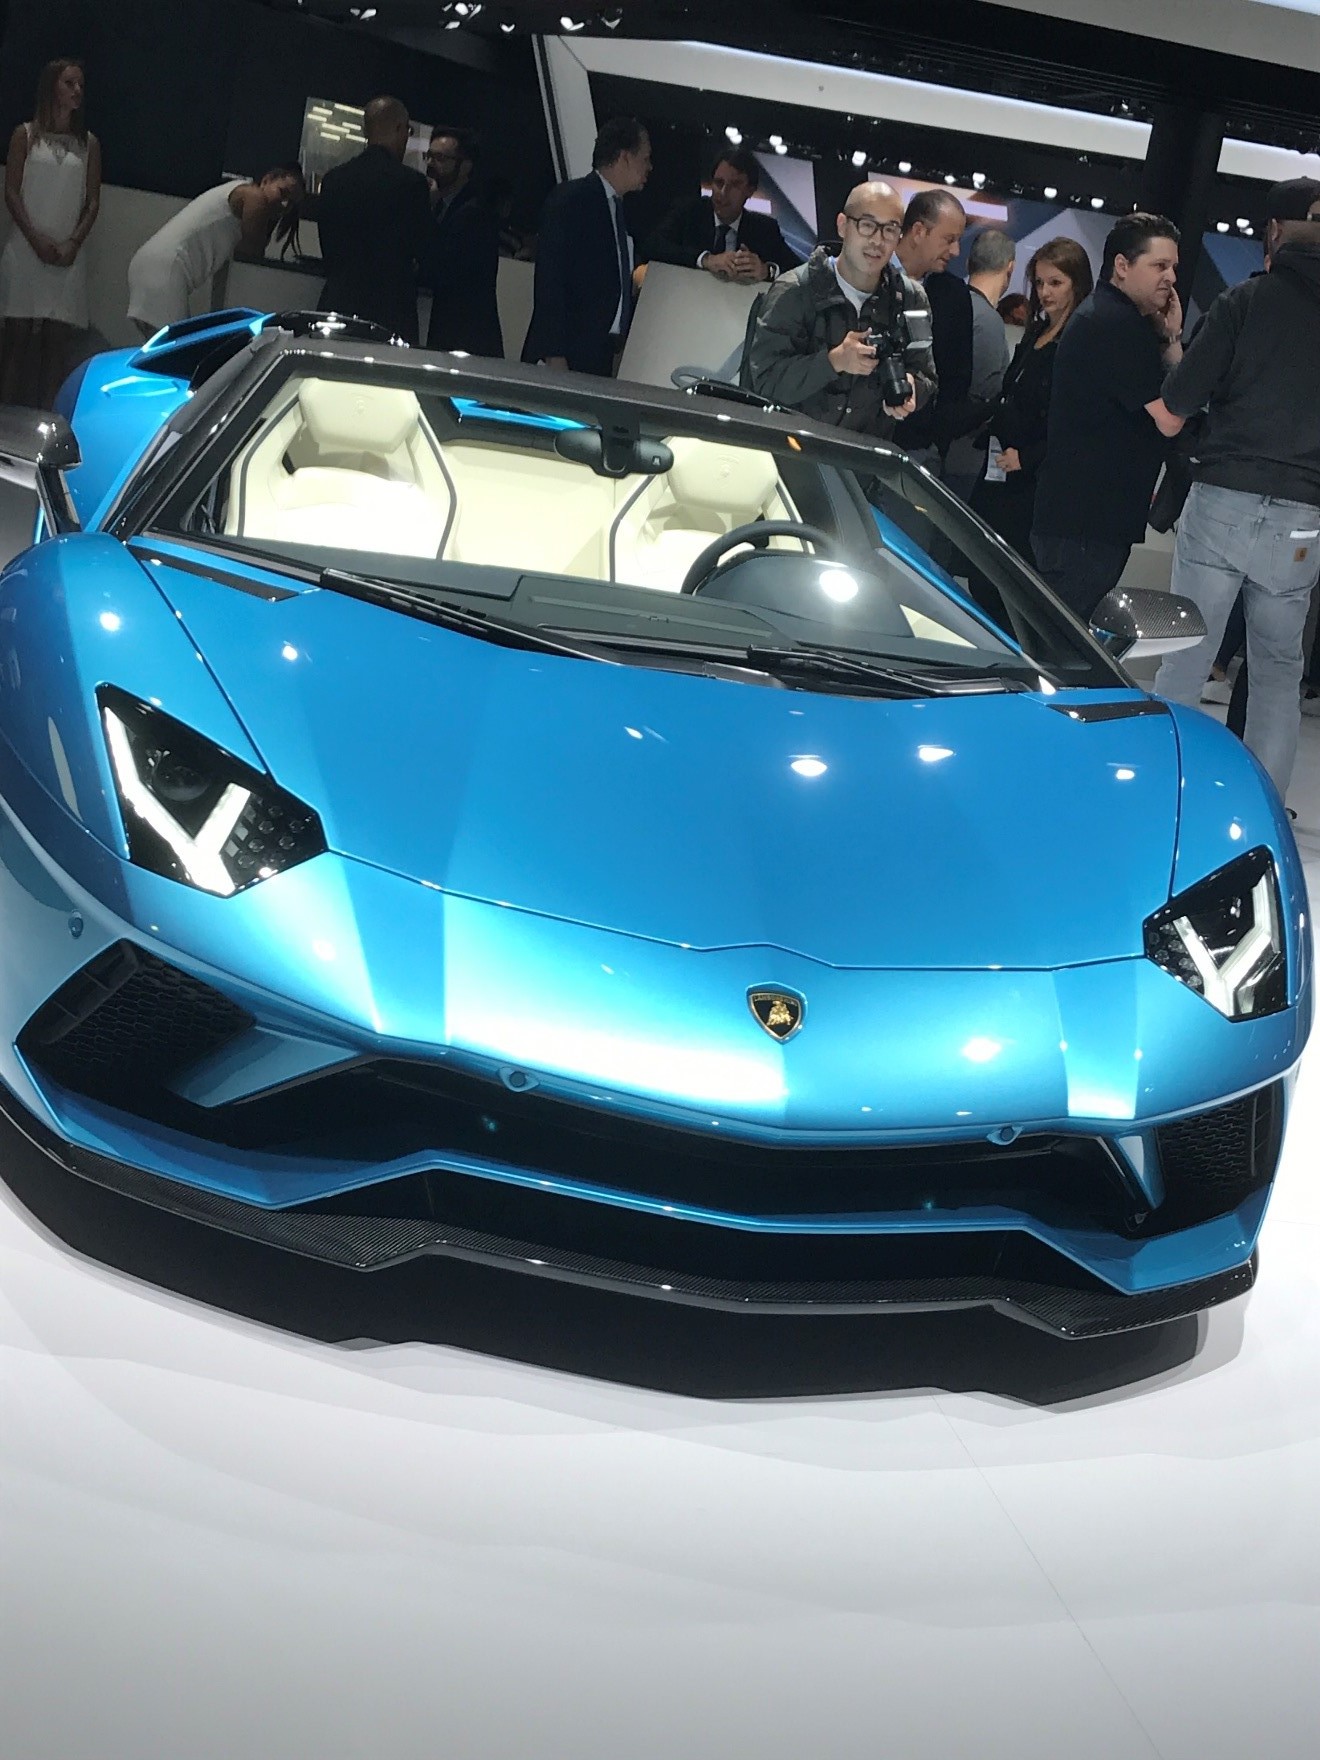 The Lamborghini Aventador S Roadster made its public debut at the 2017 Frankfurt show. In continental Europe the sportscar will be priced at EUR 313,666 and around $460,000 in the USA. Deliveries are scheduled to begin in February 2018.